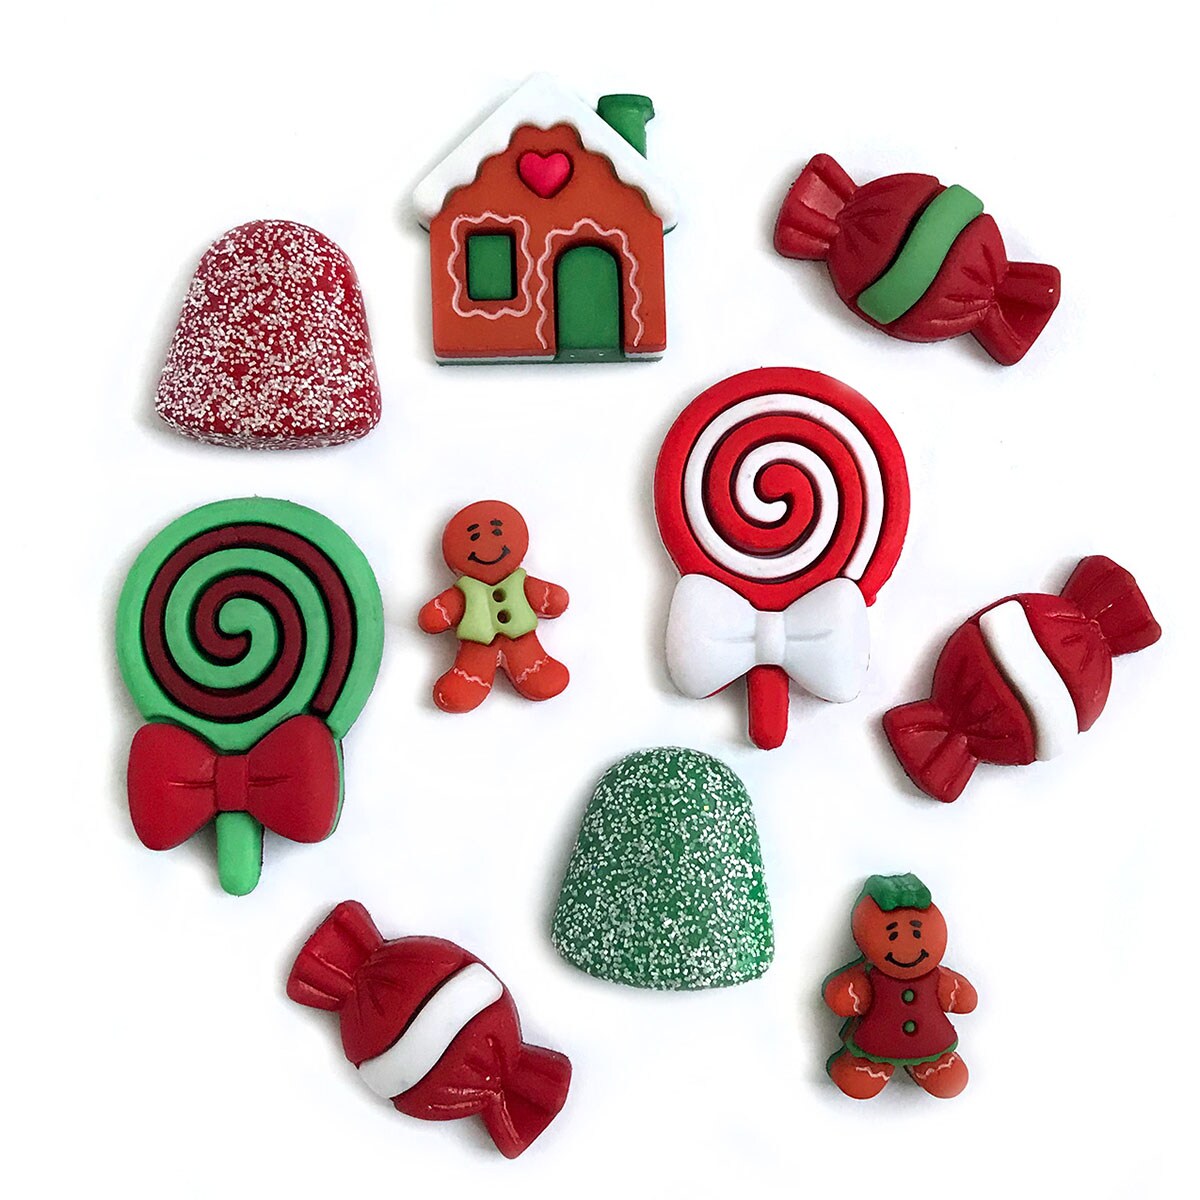 Buttons Galore 50+ Assorted Christmas Buttons for Sewing & Crafts - Set of  6 Button Packs - Candy Canes, Santa, Lights & More